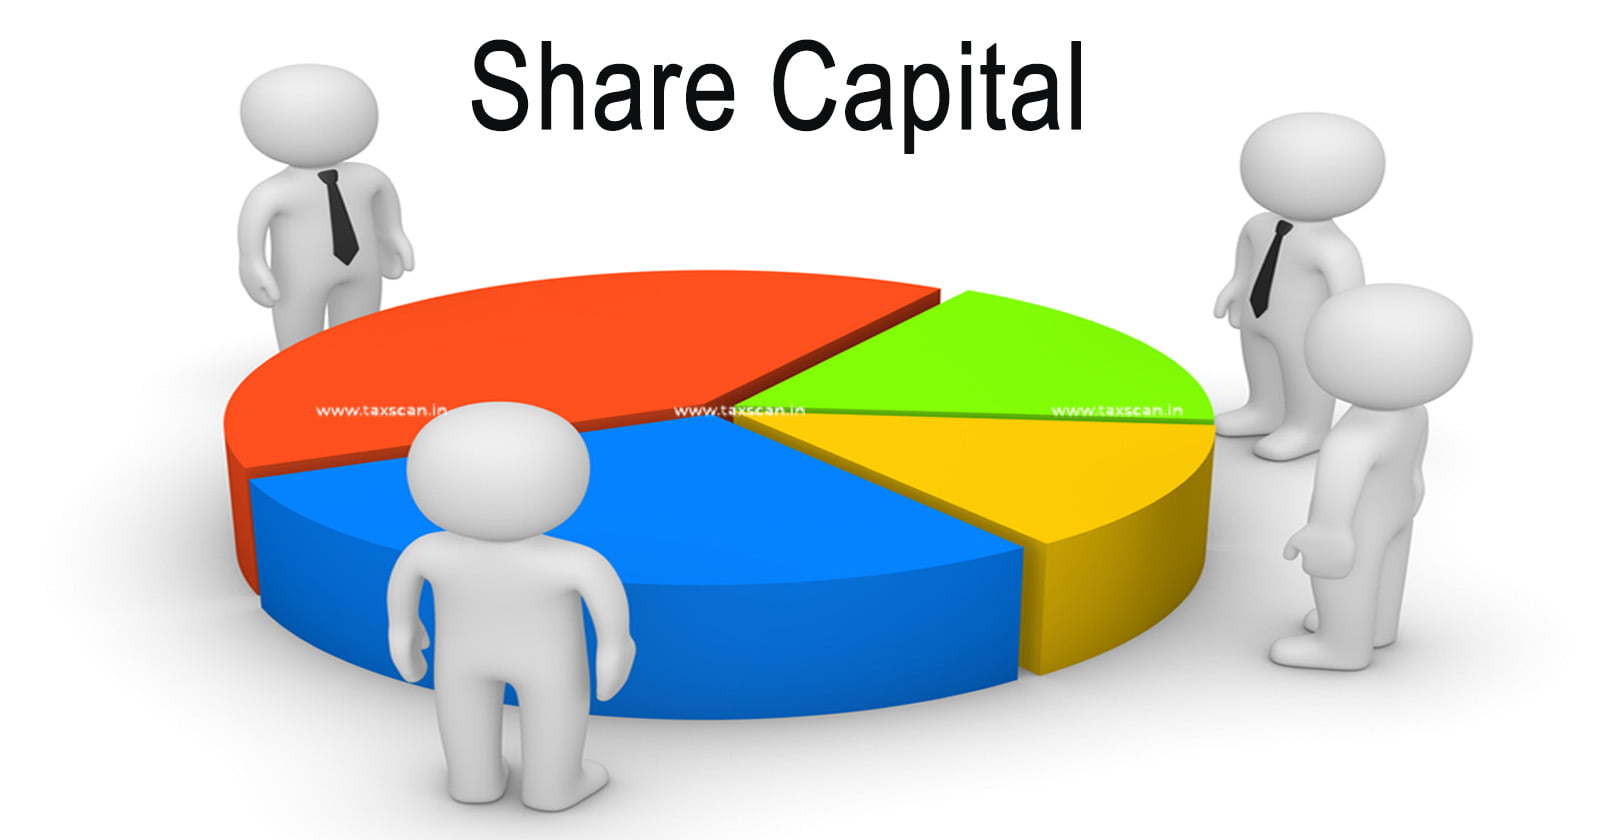 Share Capital Credited through Journal Entries are not Unexplained Share Capital - ITAT upholds deletion of addition - Income Tax Act - TAXSCAN